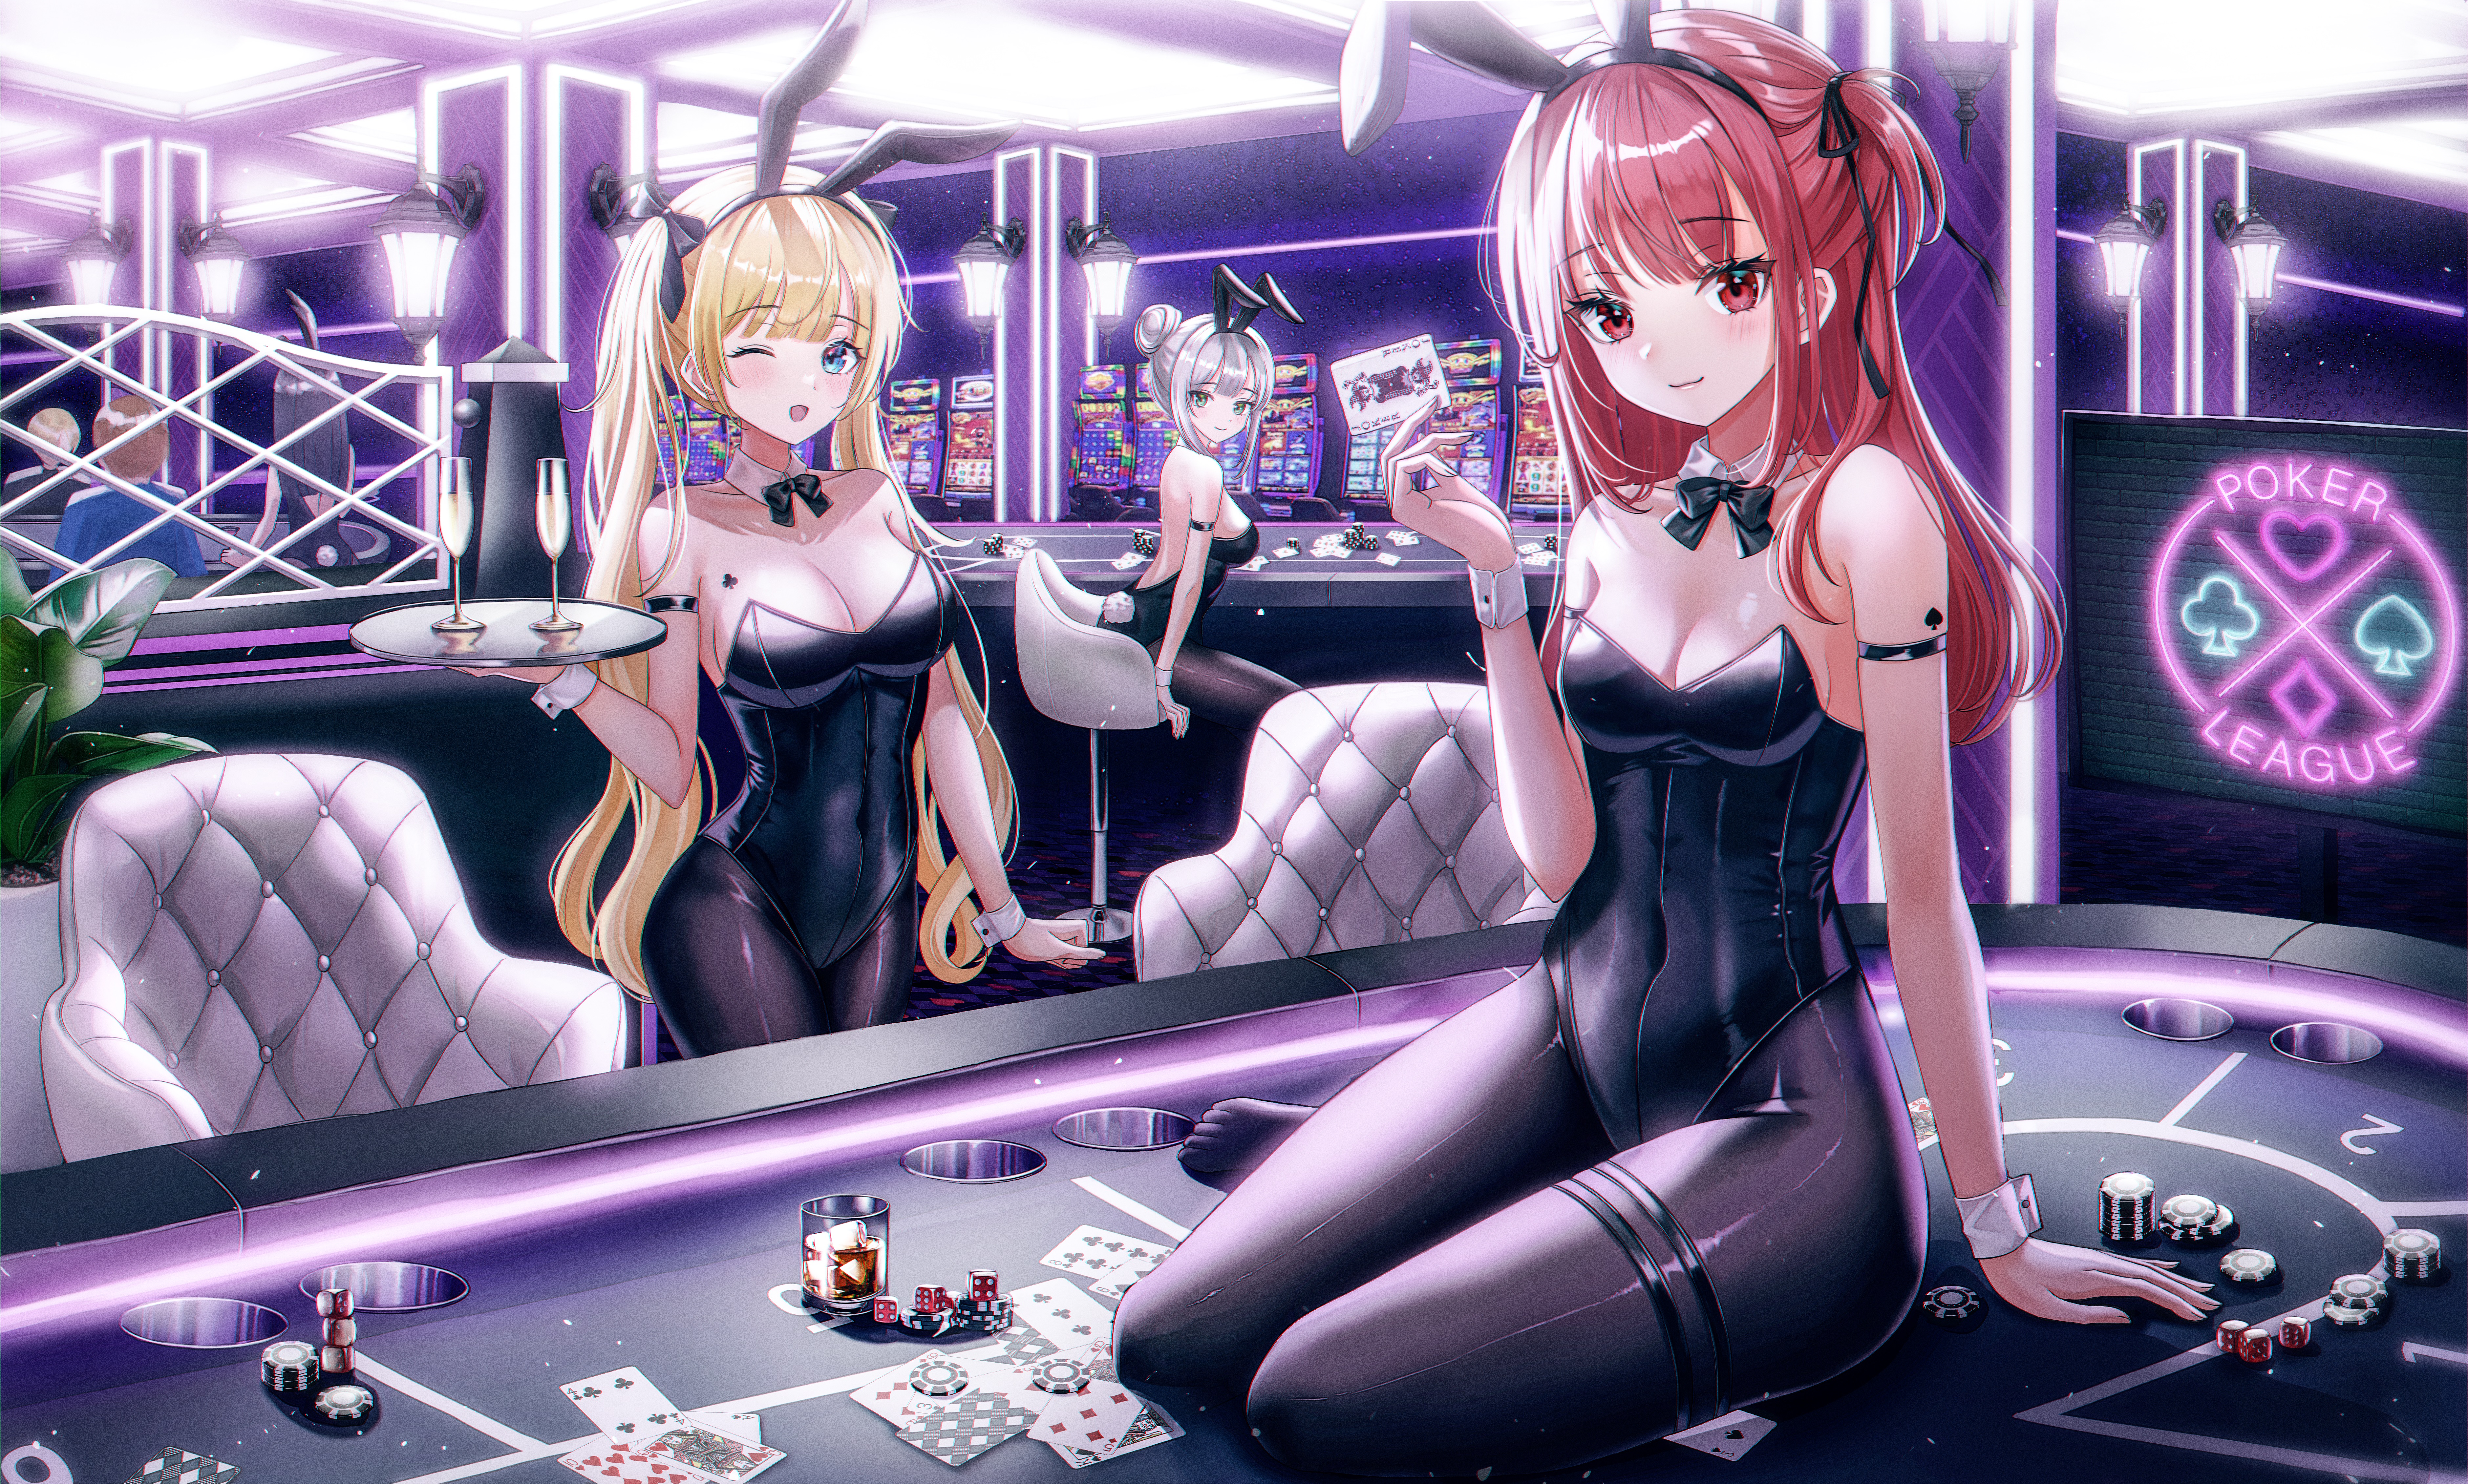 Anime 7520x4523 anime anime girls bunny suit casino Trading Card Games poker pantyhose cleavage blonde redhead silver hair Pora 0918 looking at viewer bow tie cards neon signs twintails long hair